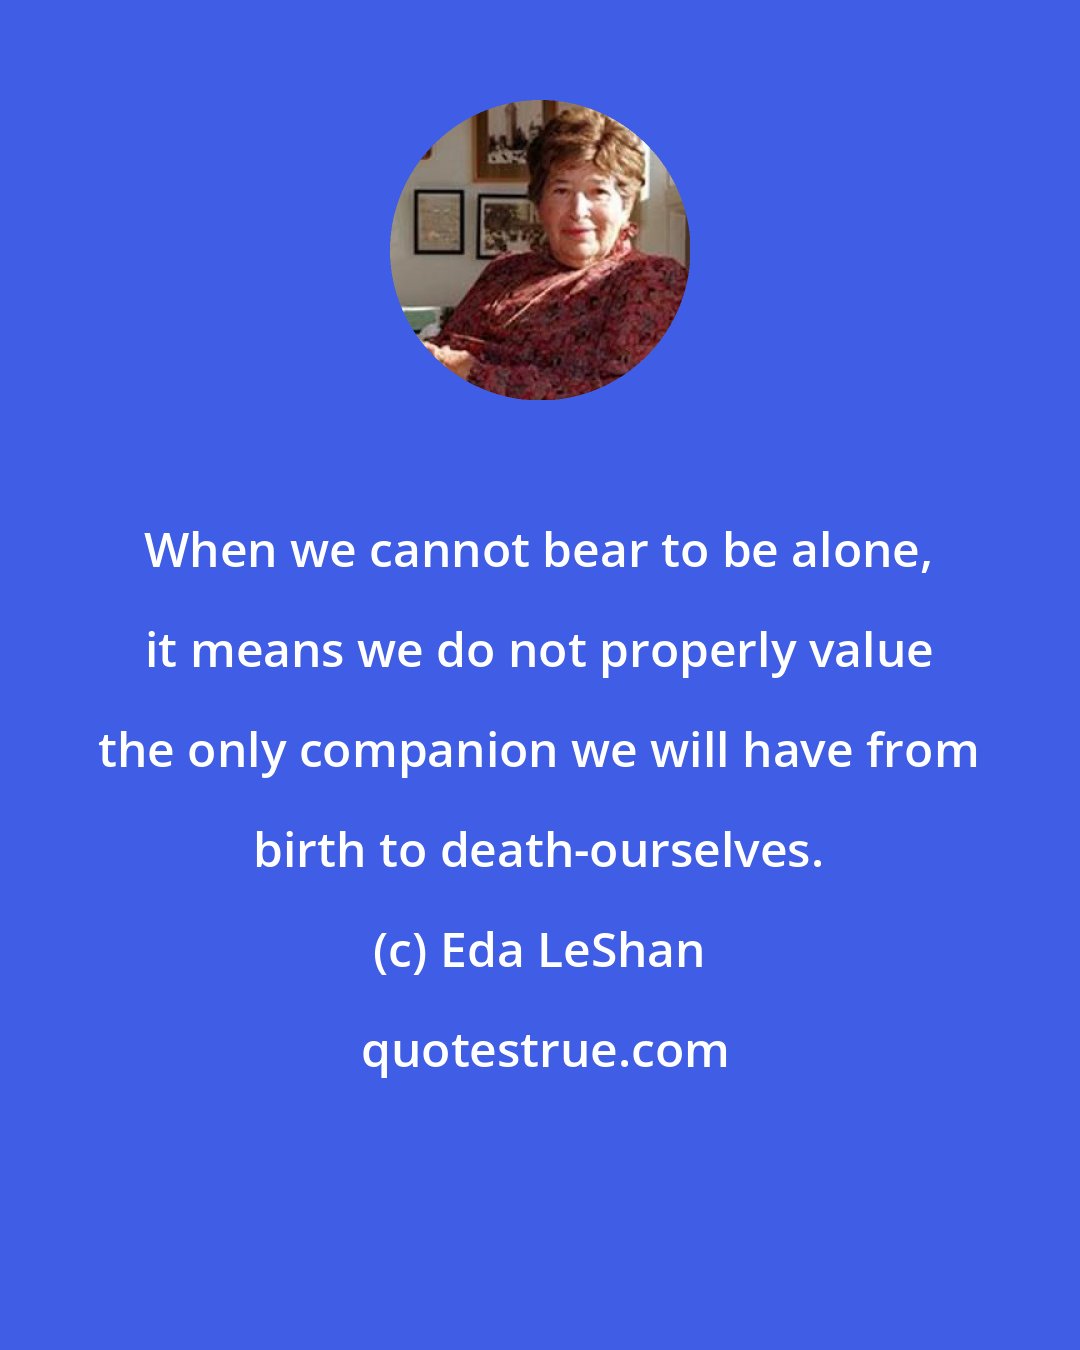 Eda LeShan: When we cannot bear to be alone, it means we do not properly value the only companion we will have from birth to death-ourselves.